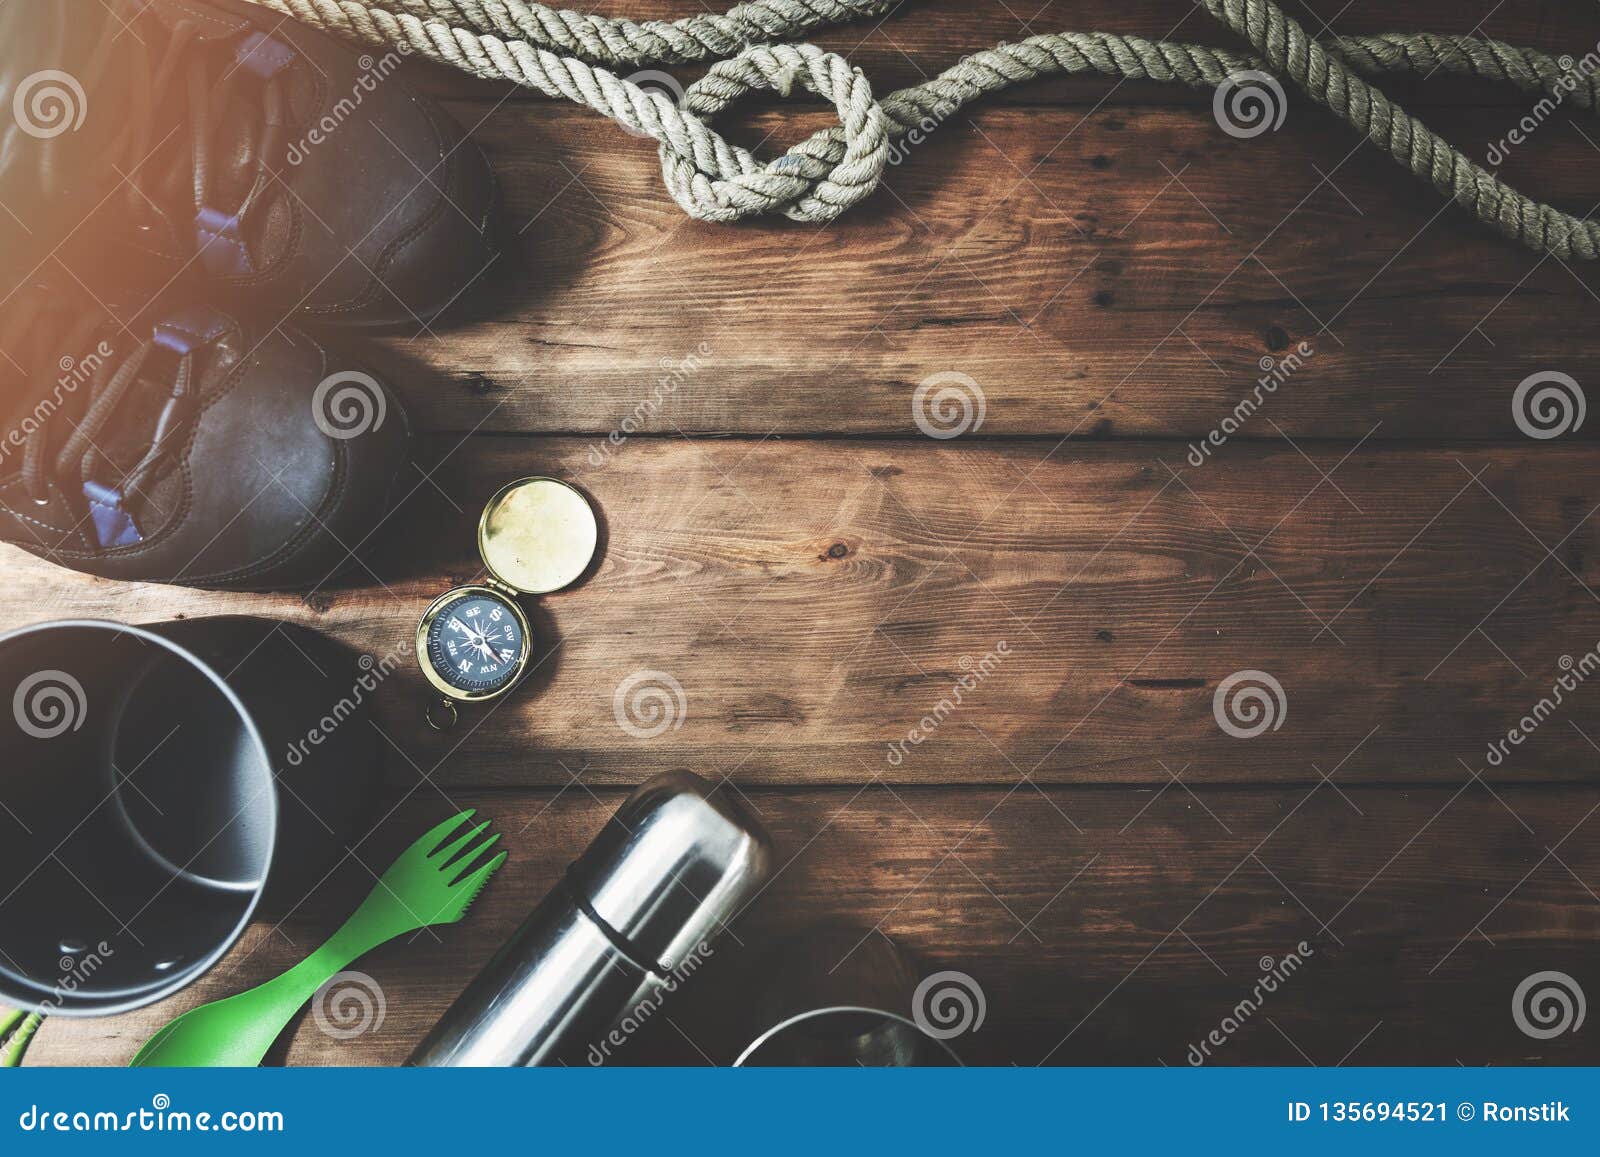 outdoor adventures - expedition camping items on wooden background